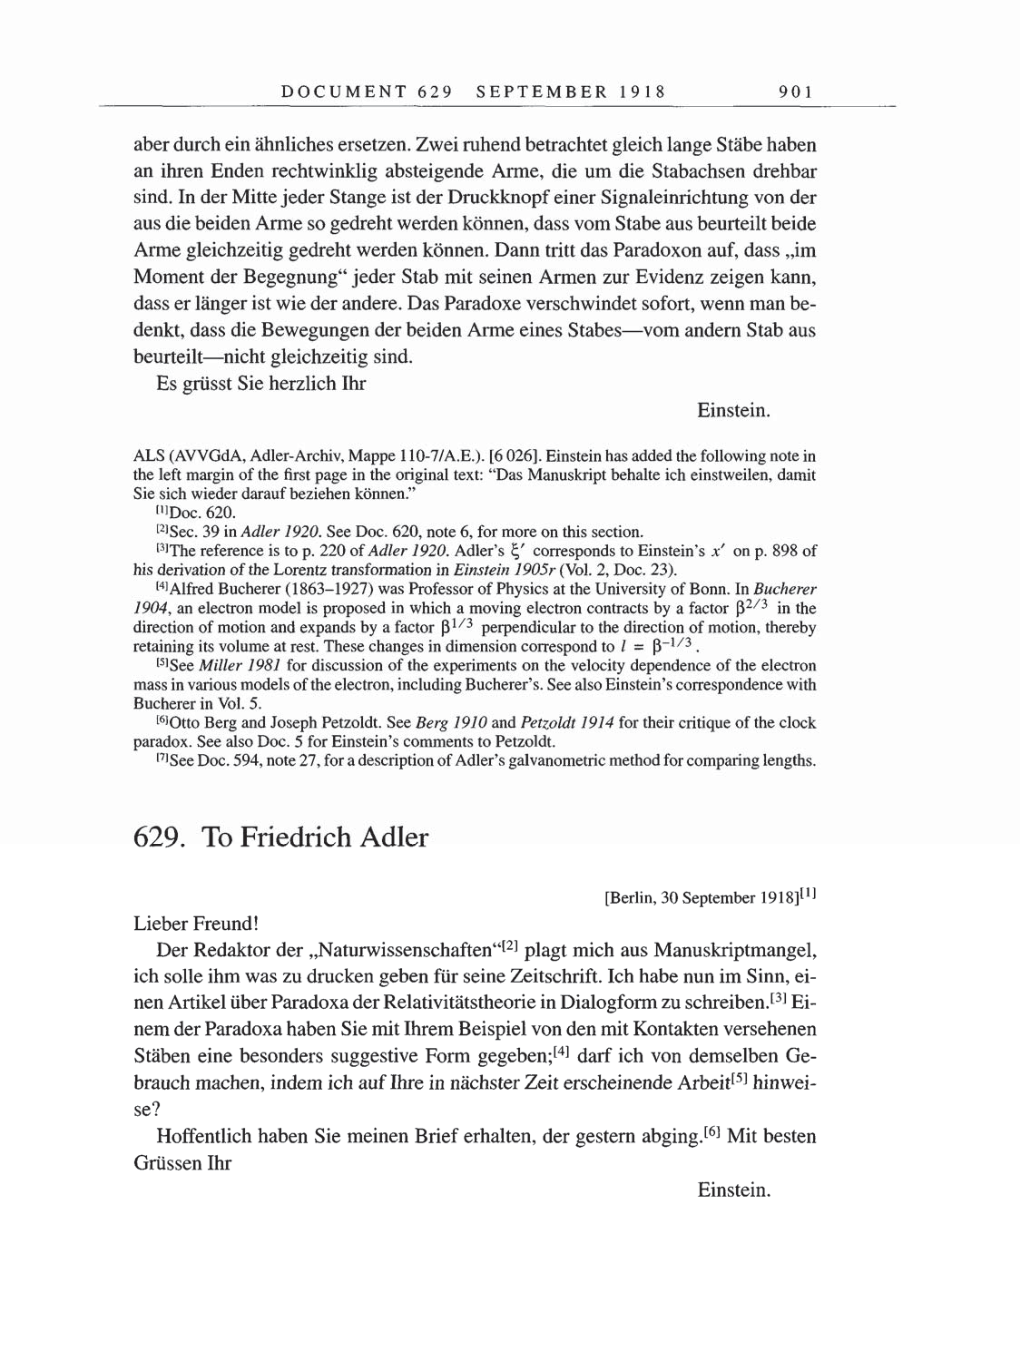 Volume 8, Part B: The Berlin Years: Correspondence 1918 page 901